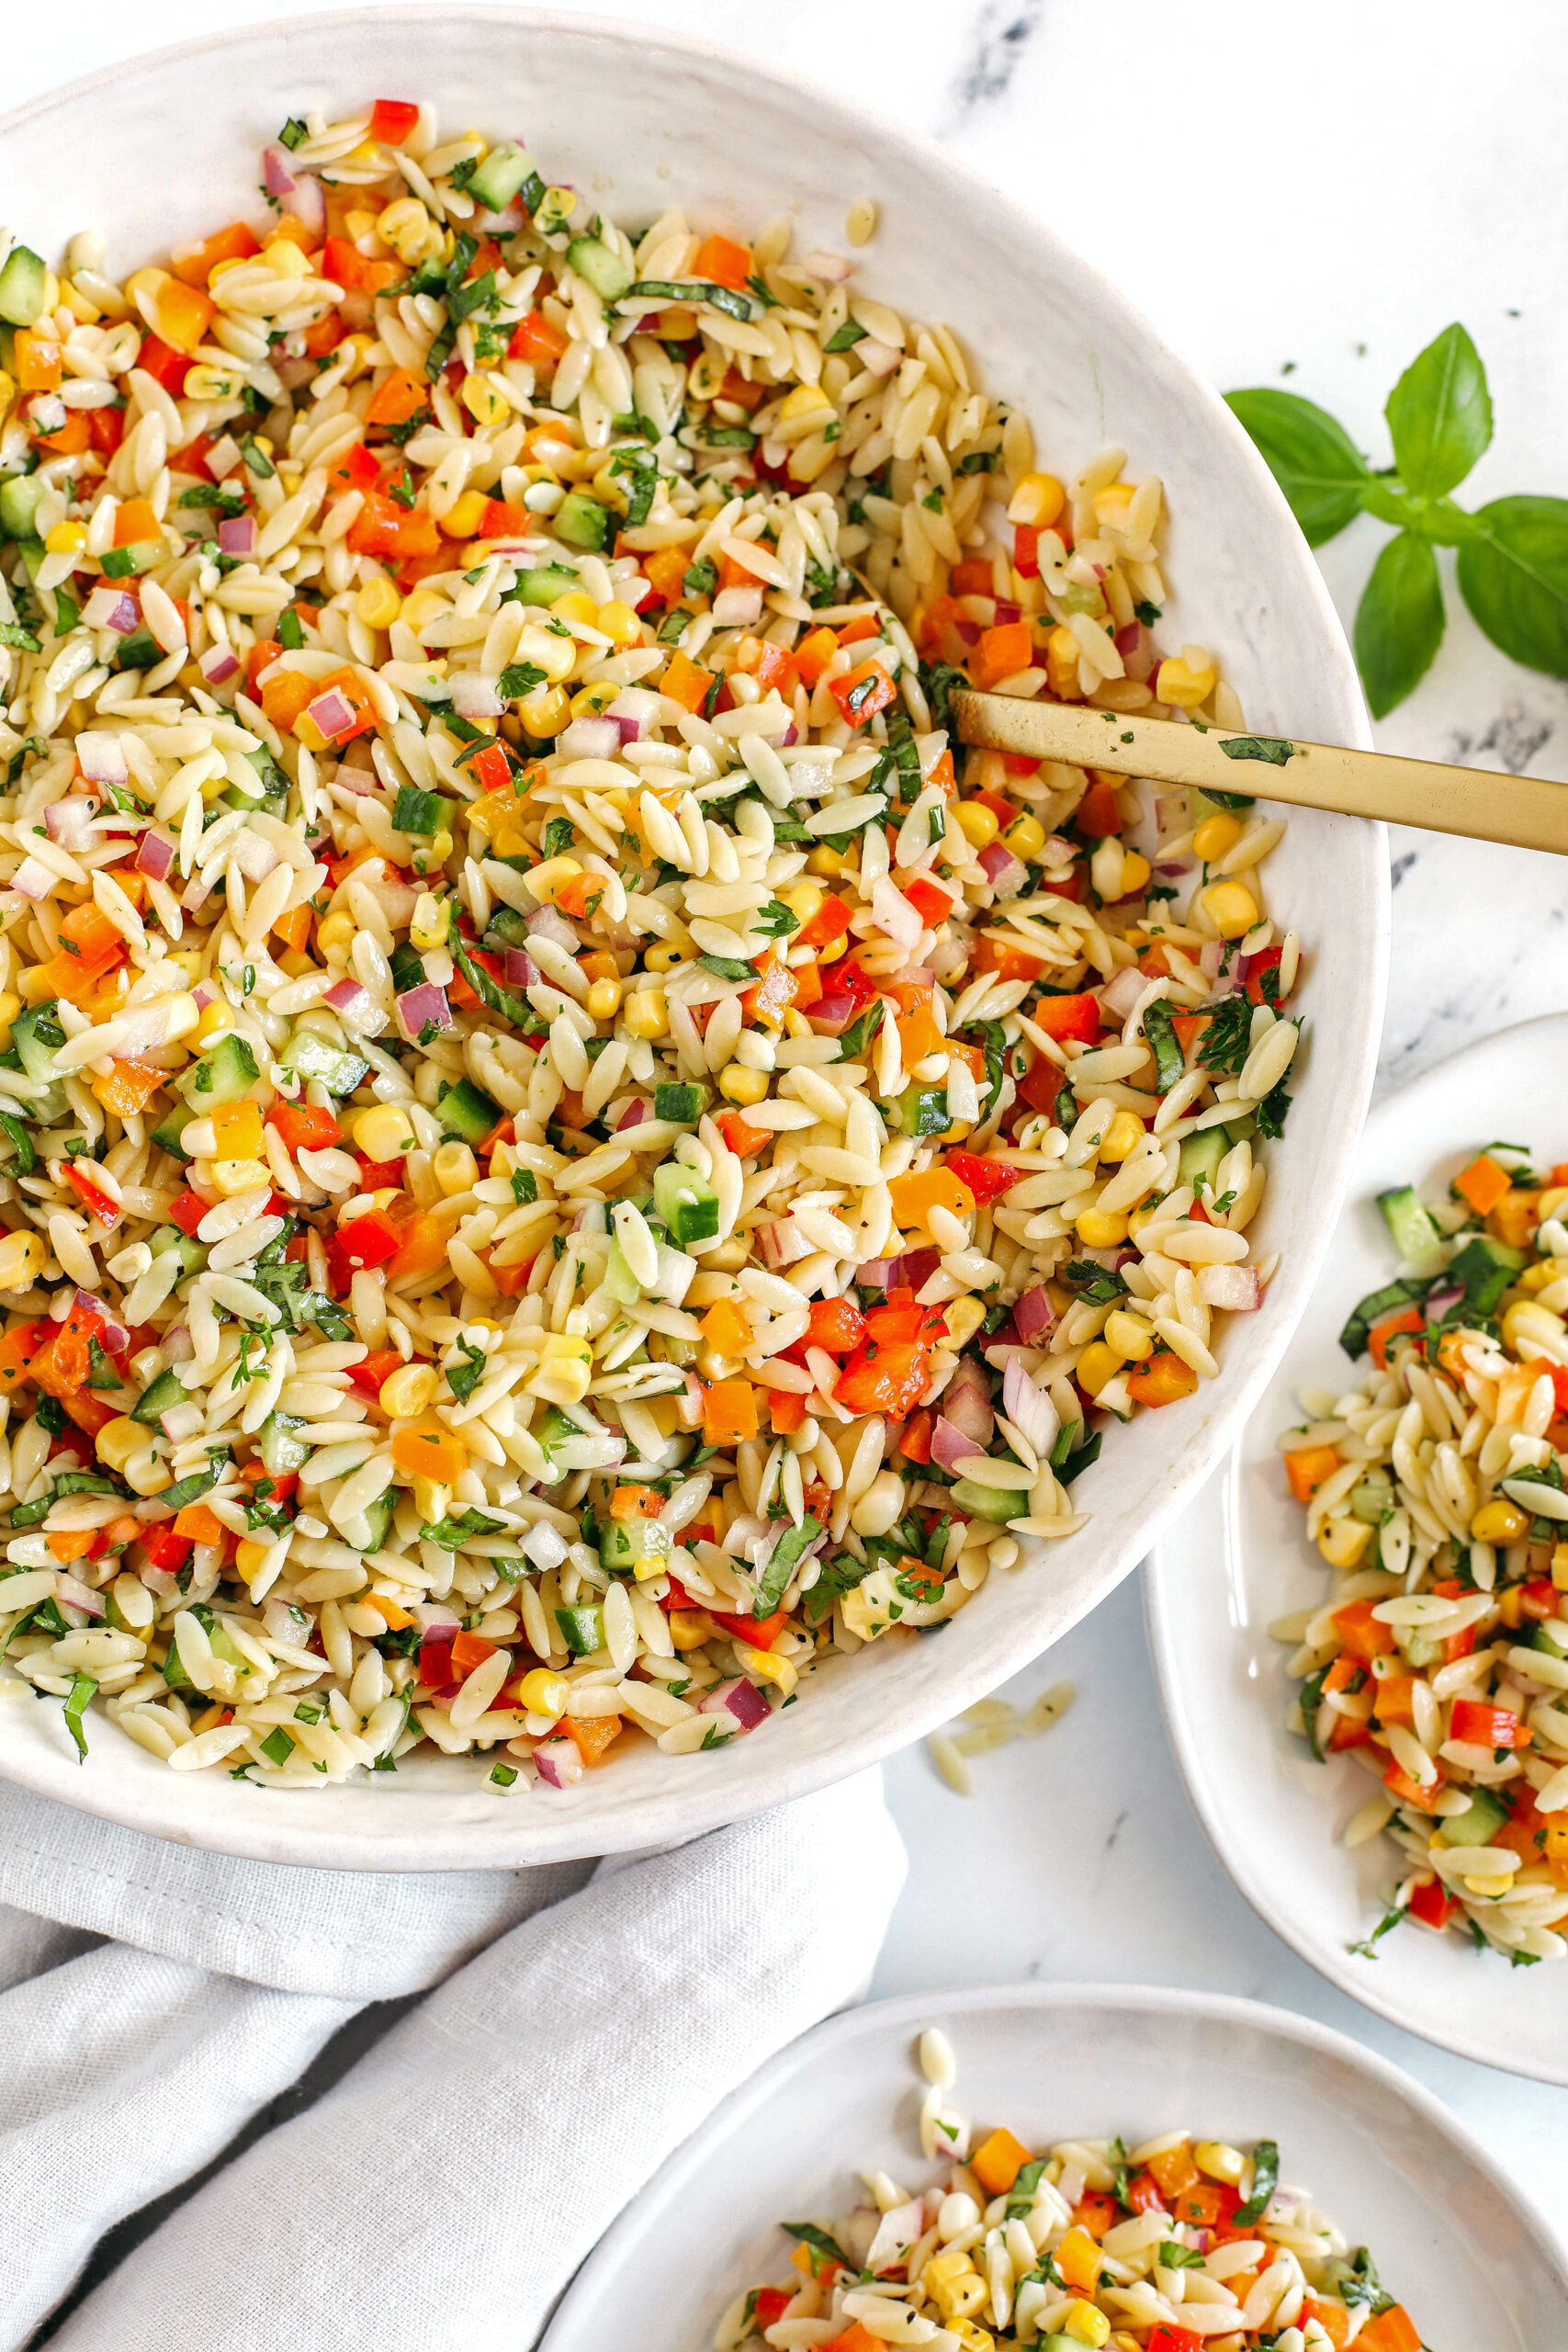 This Rainbow Orzo Salad makes the perfect summer side dish!  Loaded with colorful veggies, fresh herbs and tender orzo pasta, all tossed together with a delicious lemon herb dressing and easily made in just minutes!